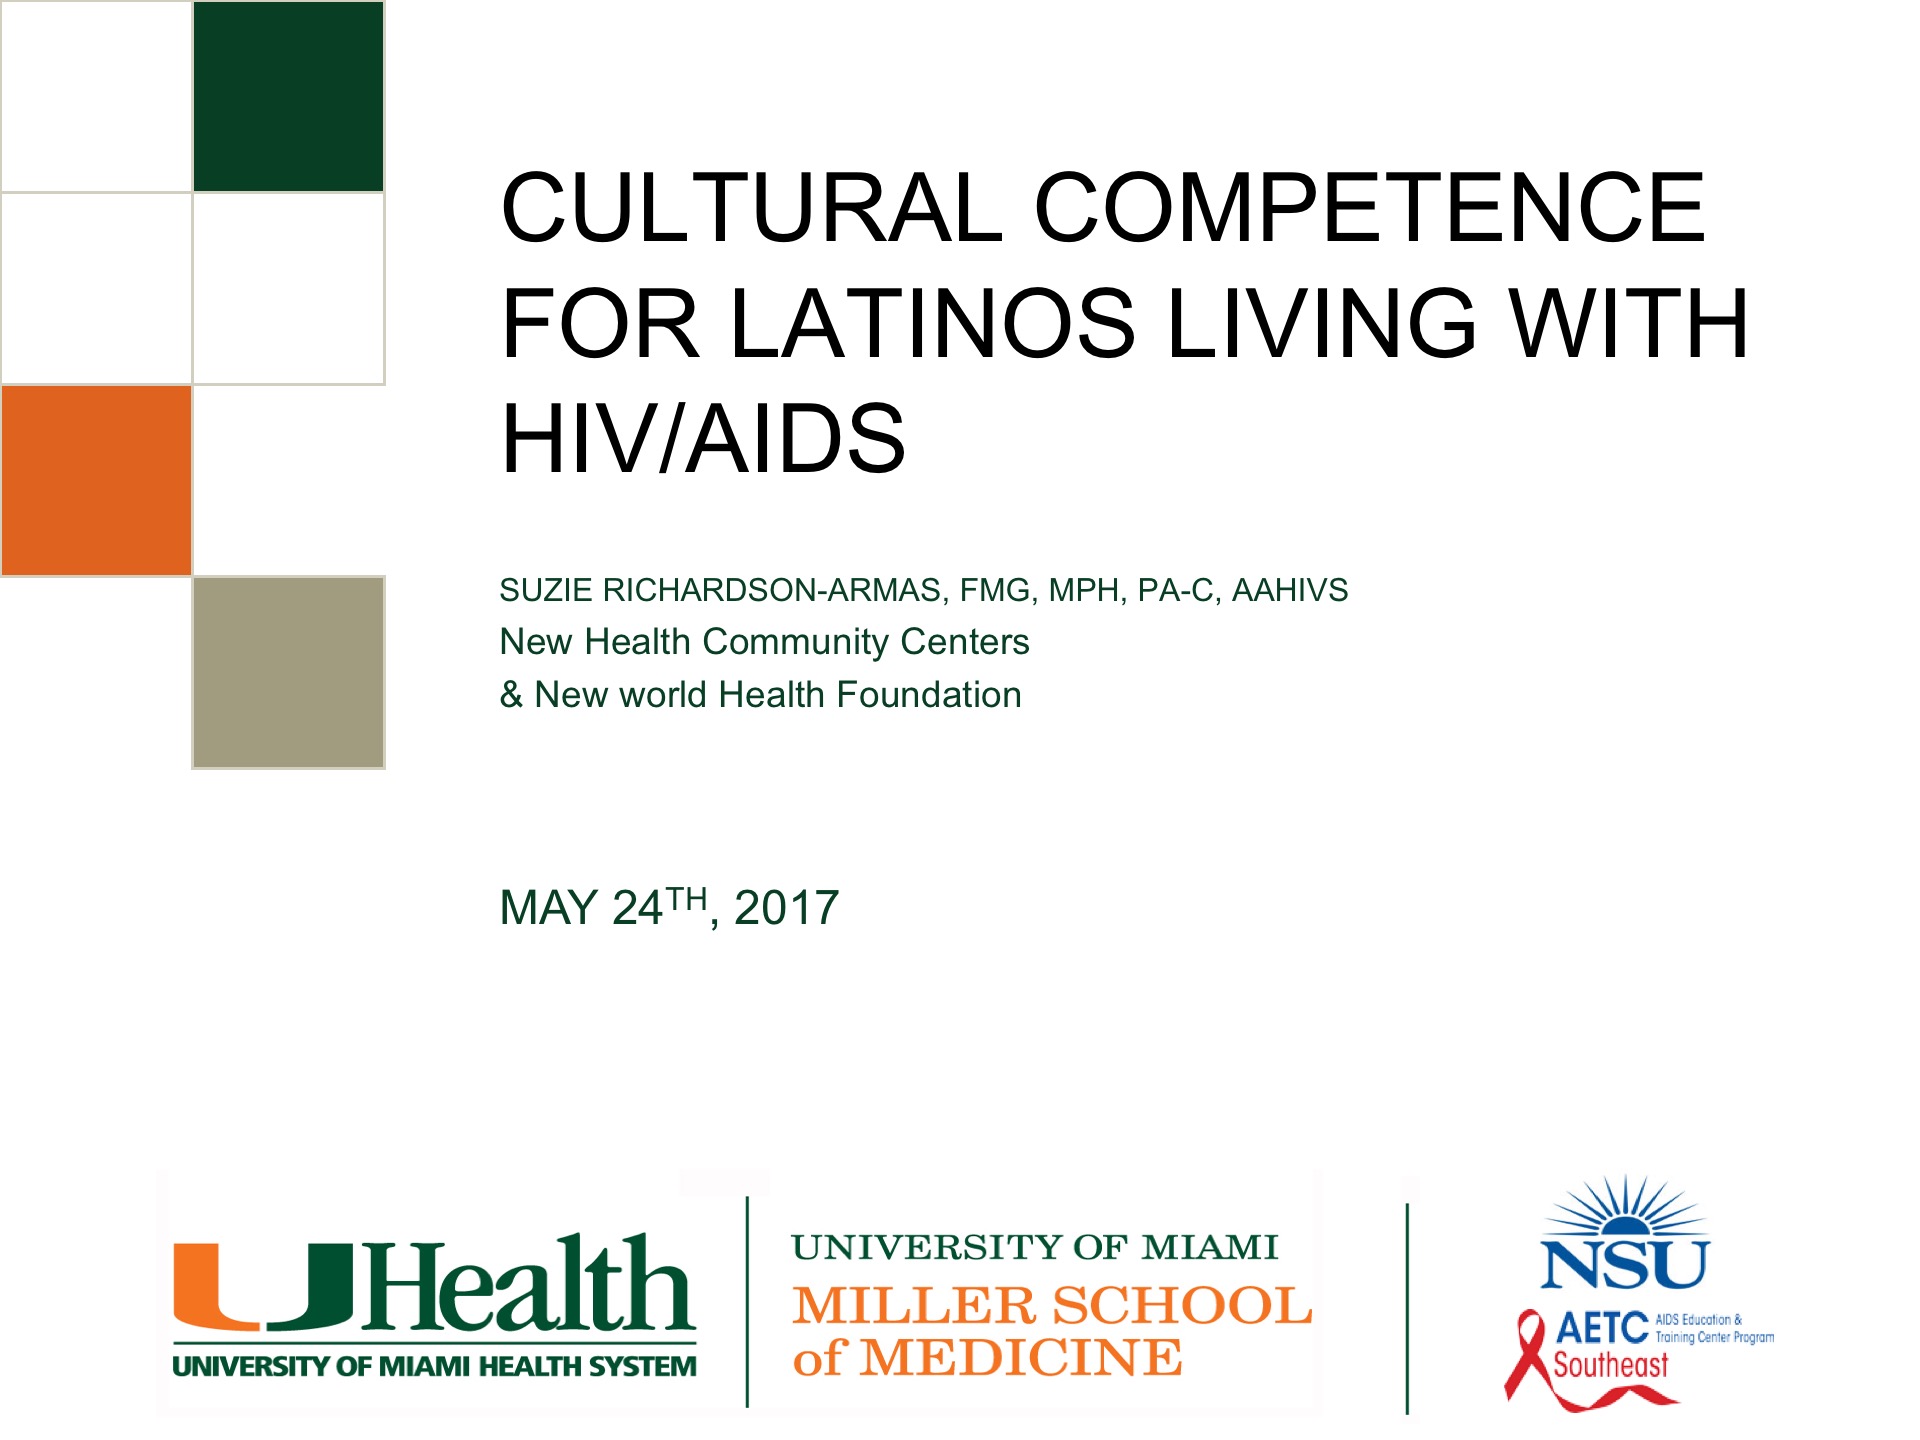 CULTURAL COMPETENCE FOR LATINOS LIVING WITH HIV/AIDS